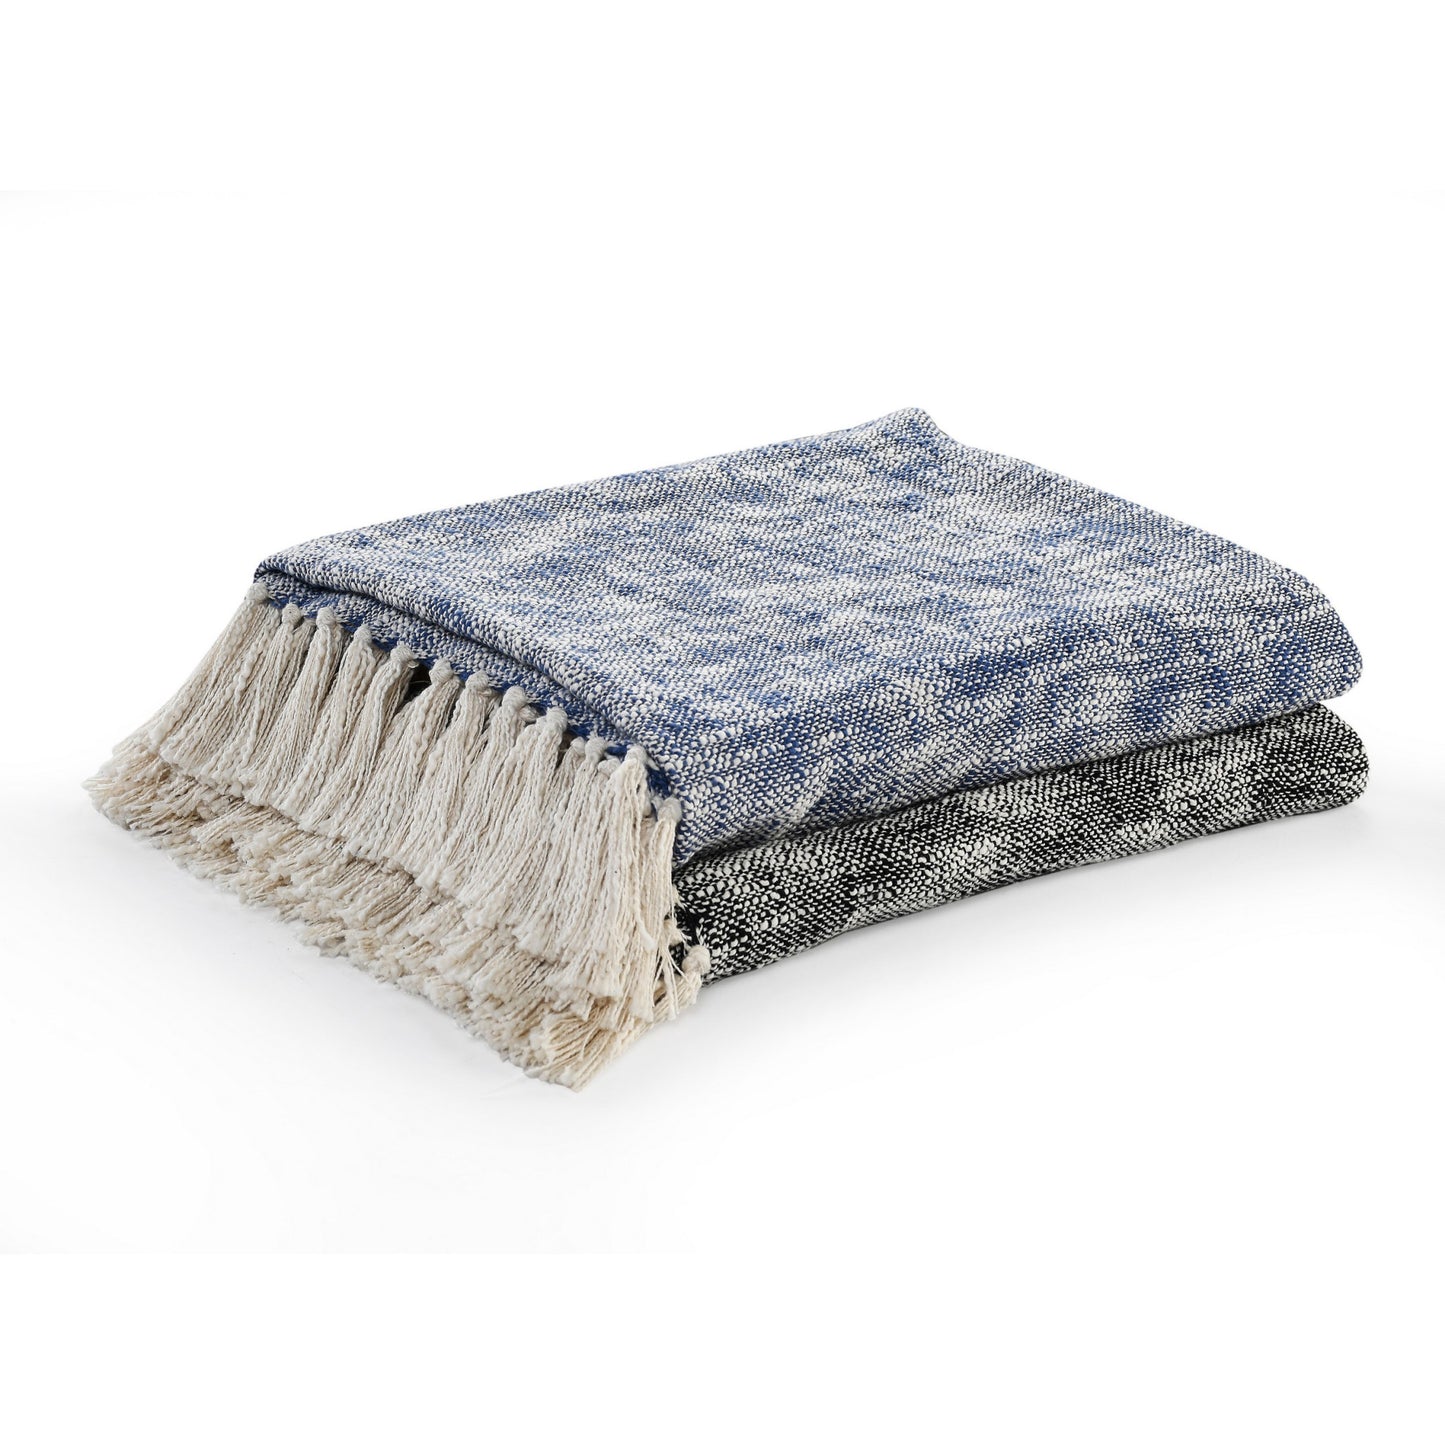 Blue and White Woven Cotton Solid Color Throw Blanket